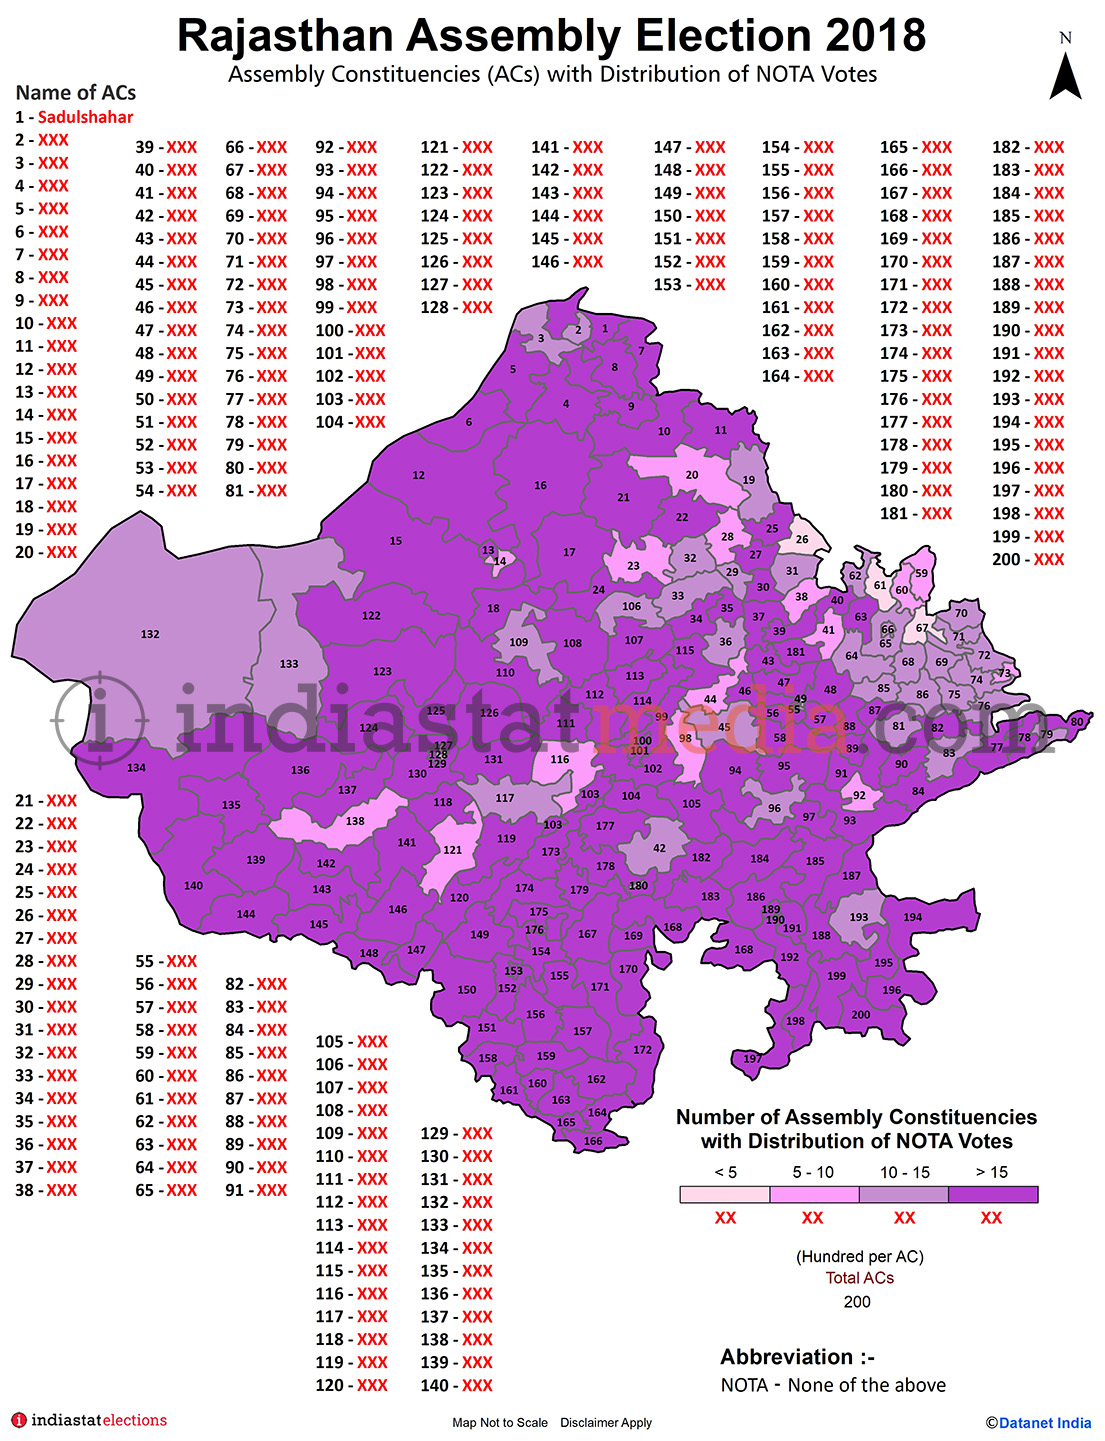 Distribution of NOTA Votes by Constituencies in Rajasthan (Assembly Election - 2018)